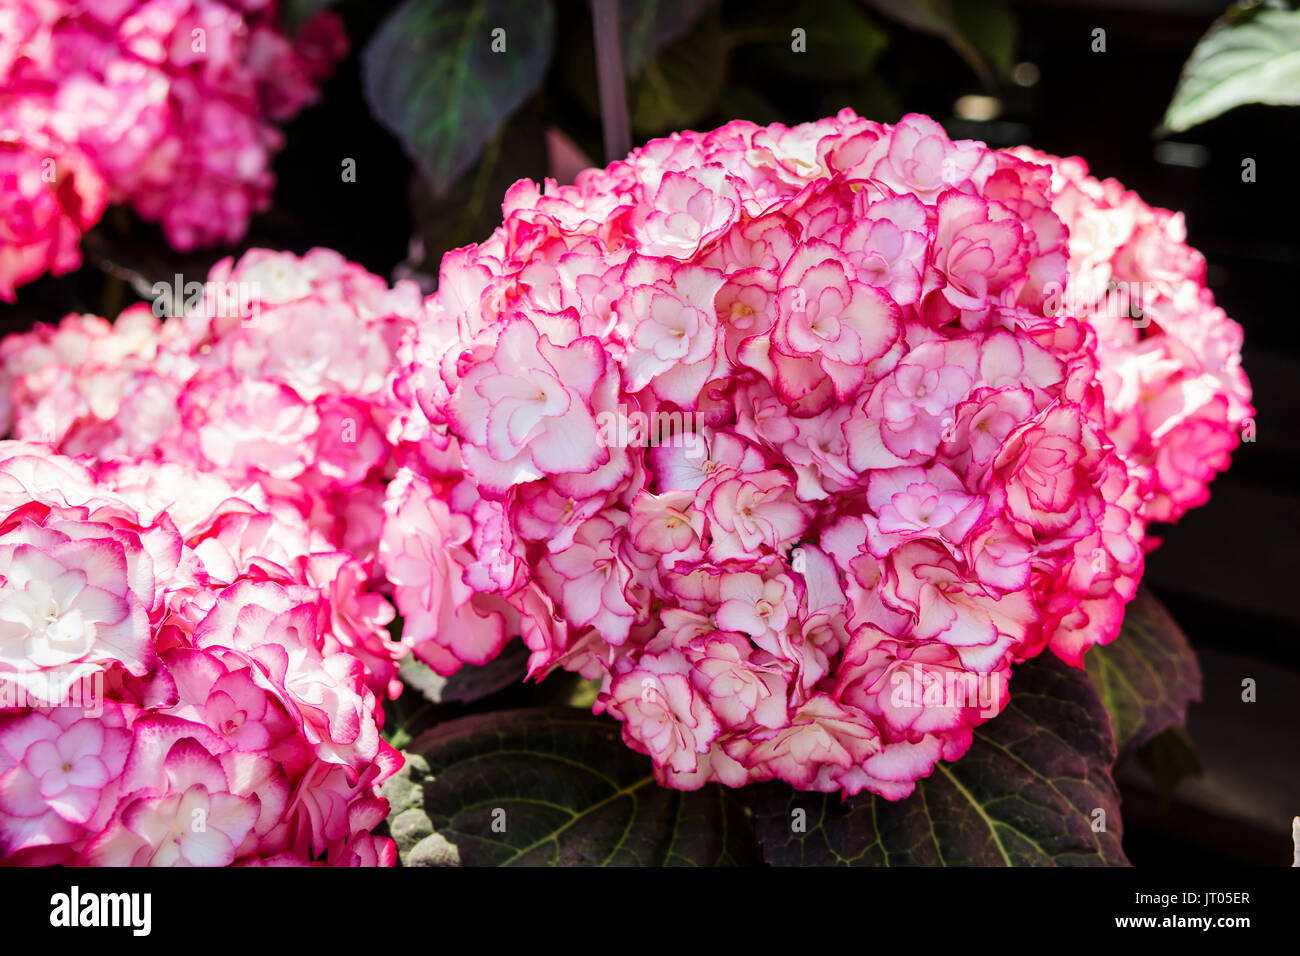 Hydrangea macrophylla with intricate dark pink and white double flowers. Stock Photo